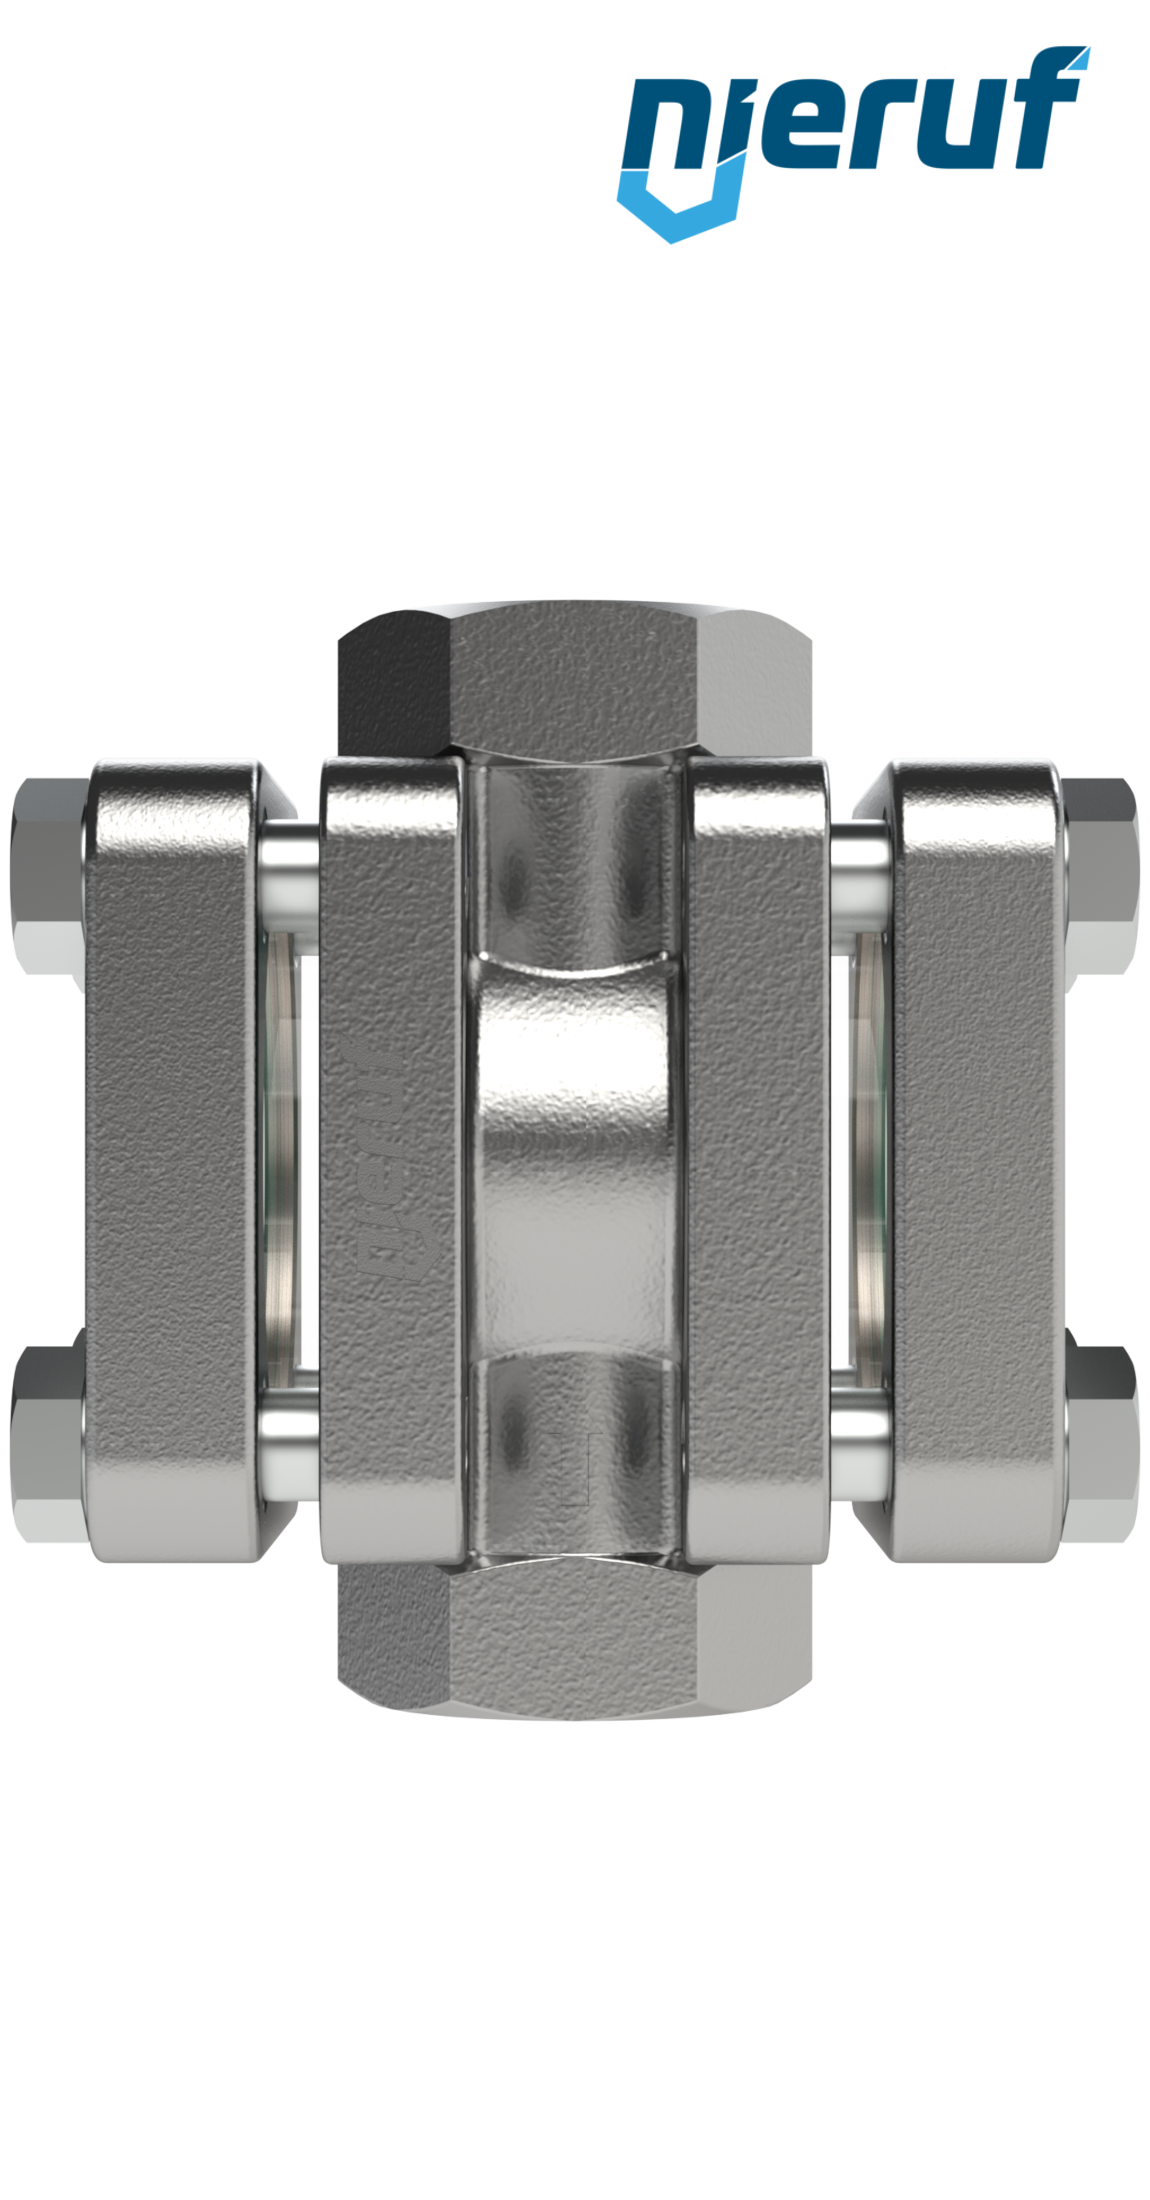 flow-through sight flow indicator DN40 - 1 1/2" Inch stainless steel soda lime glass design with disc